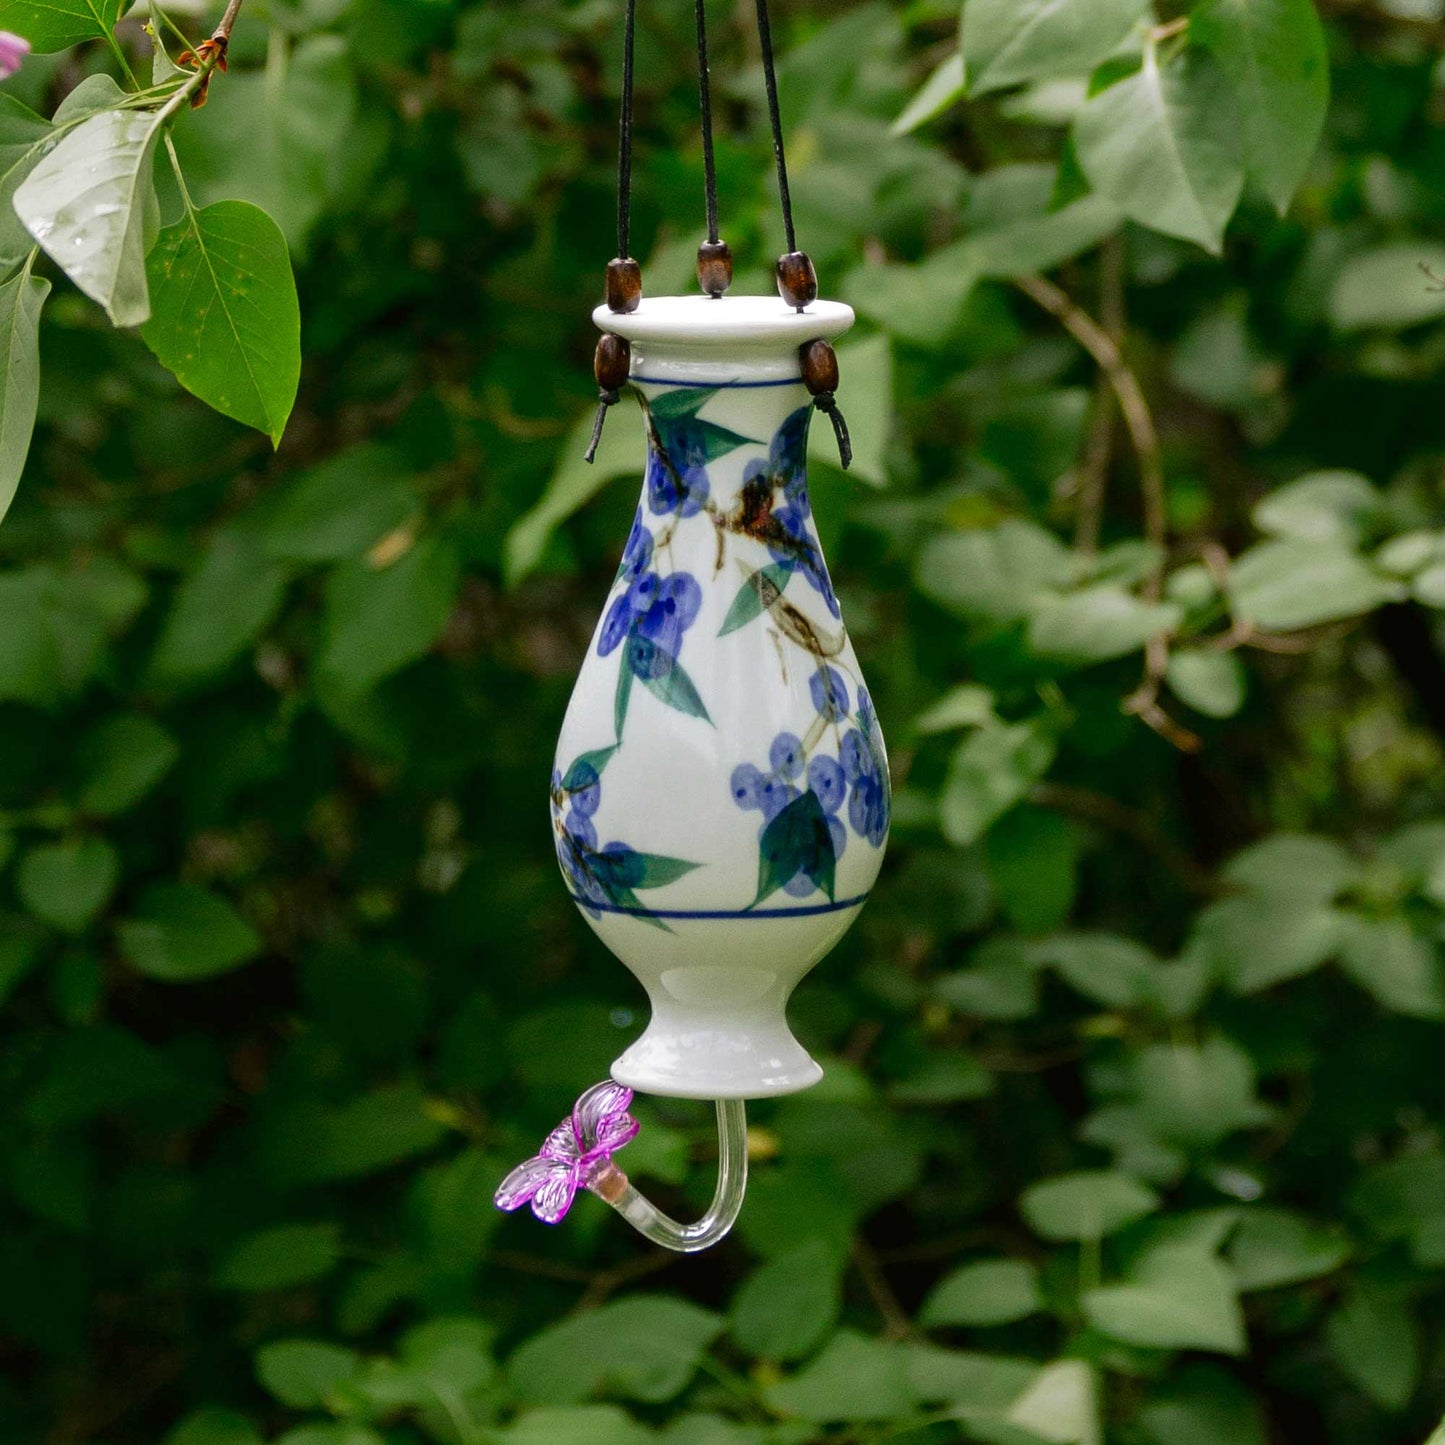 Handmade Pottery Bottle Hummingbird Feeder in Blueberry pattern made by Georgetown Pottery in Maine